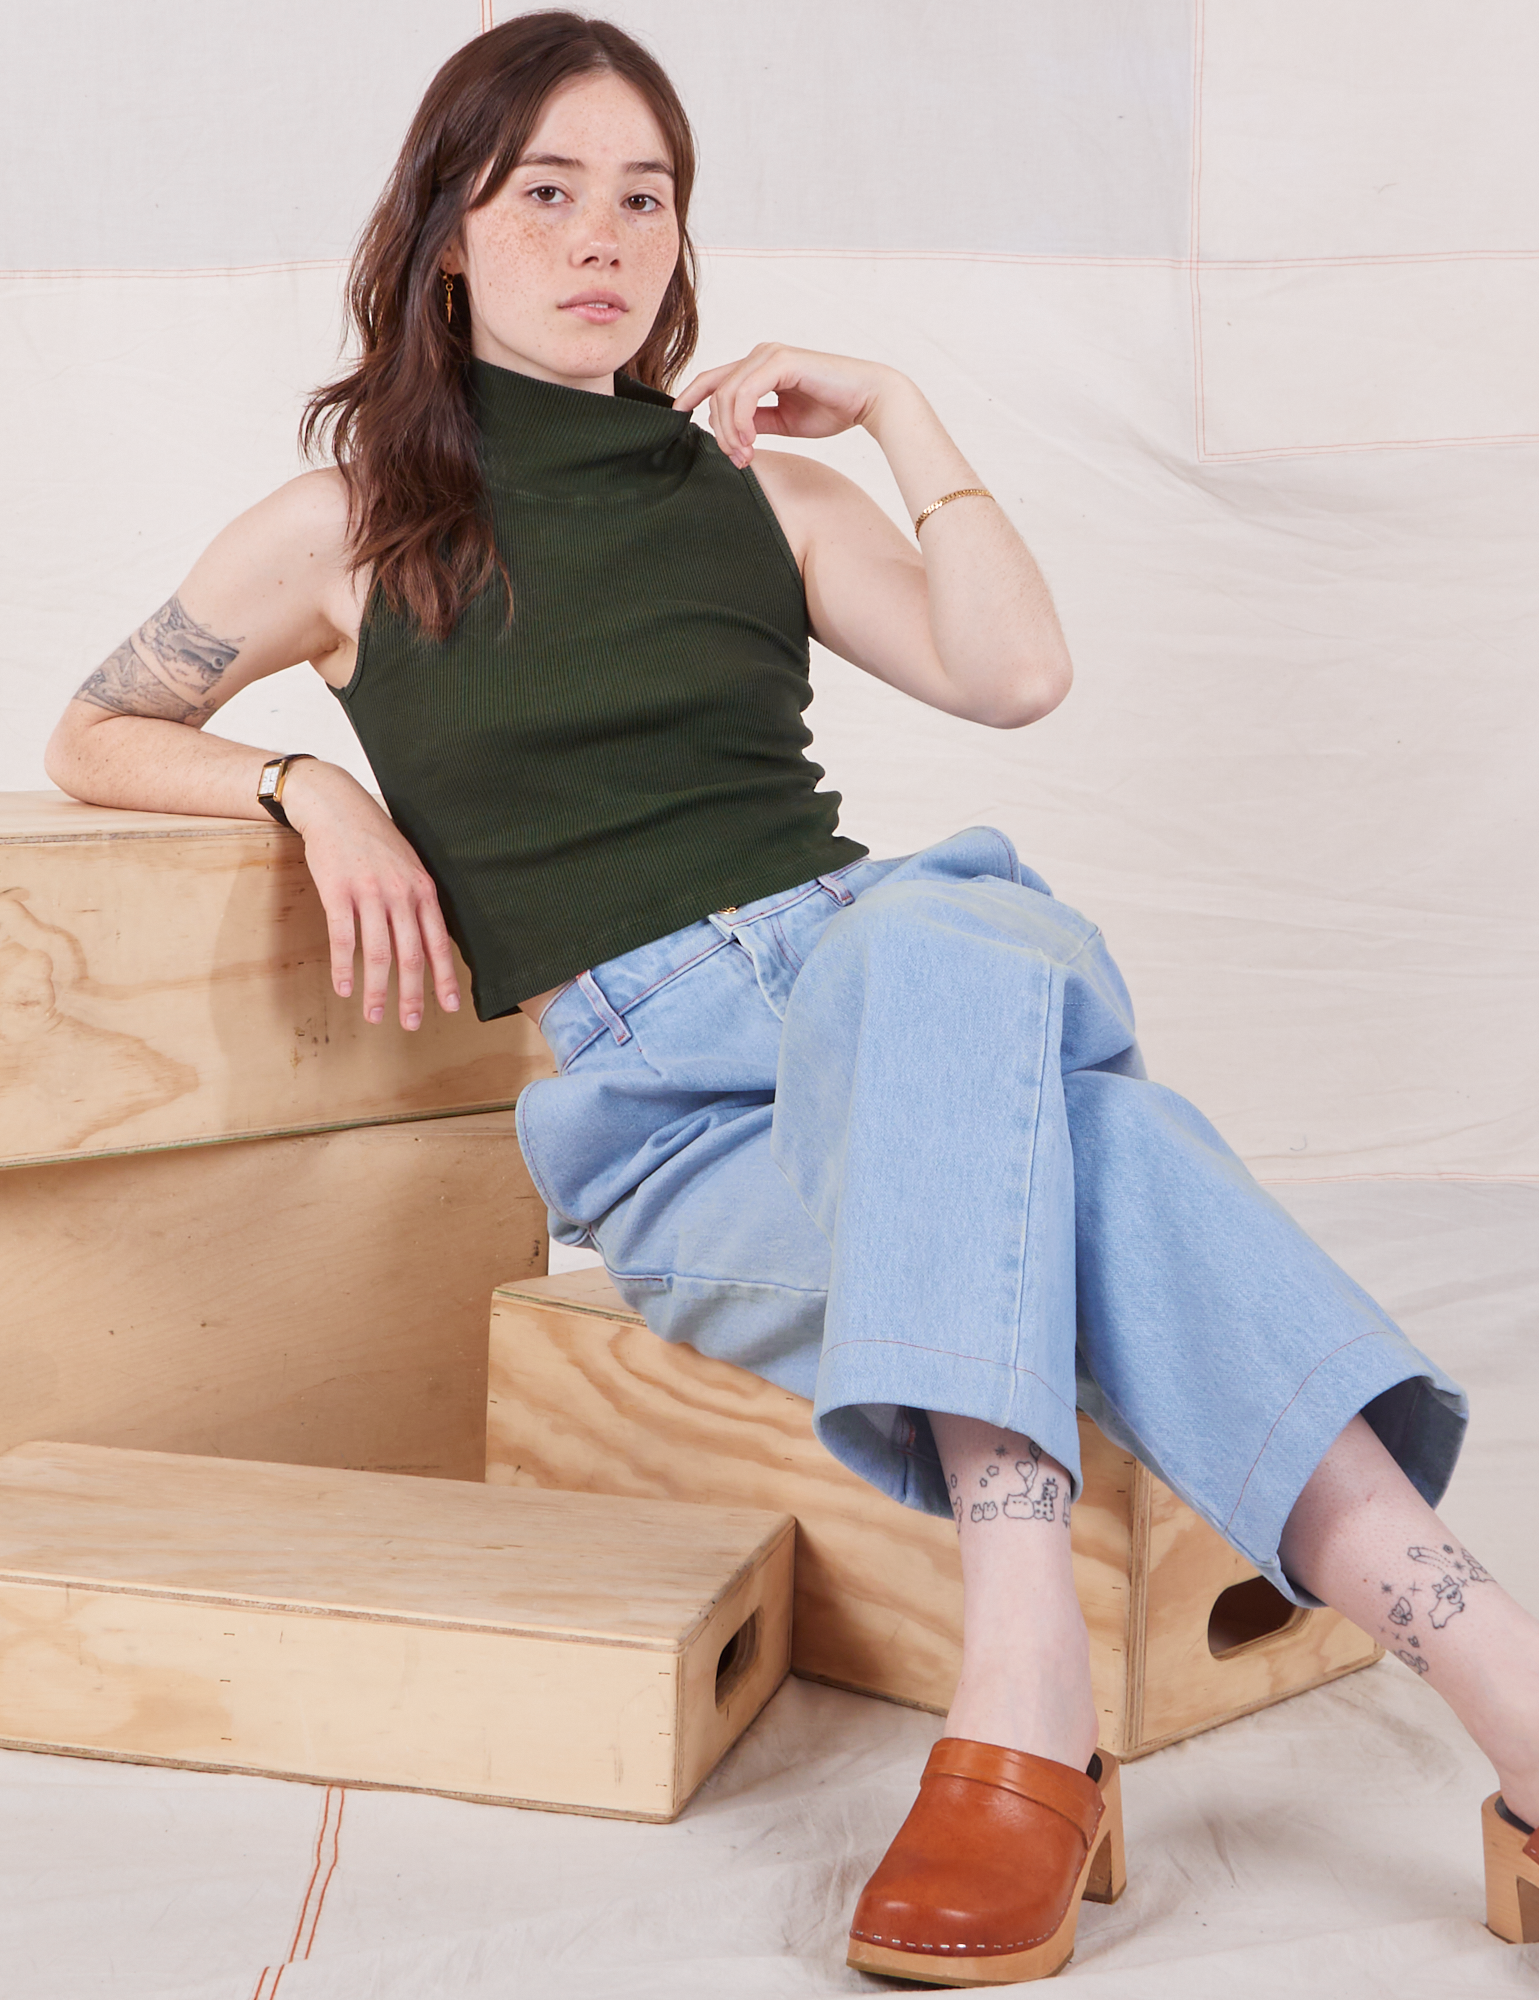 Hana is wearing Sleeveless Essential Turtleneck in Swamp Green and light wash Denim Trouser Jeans